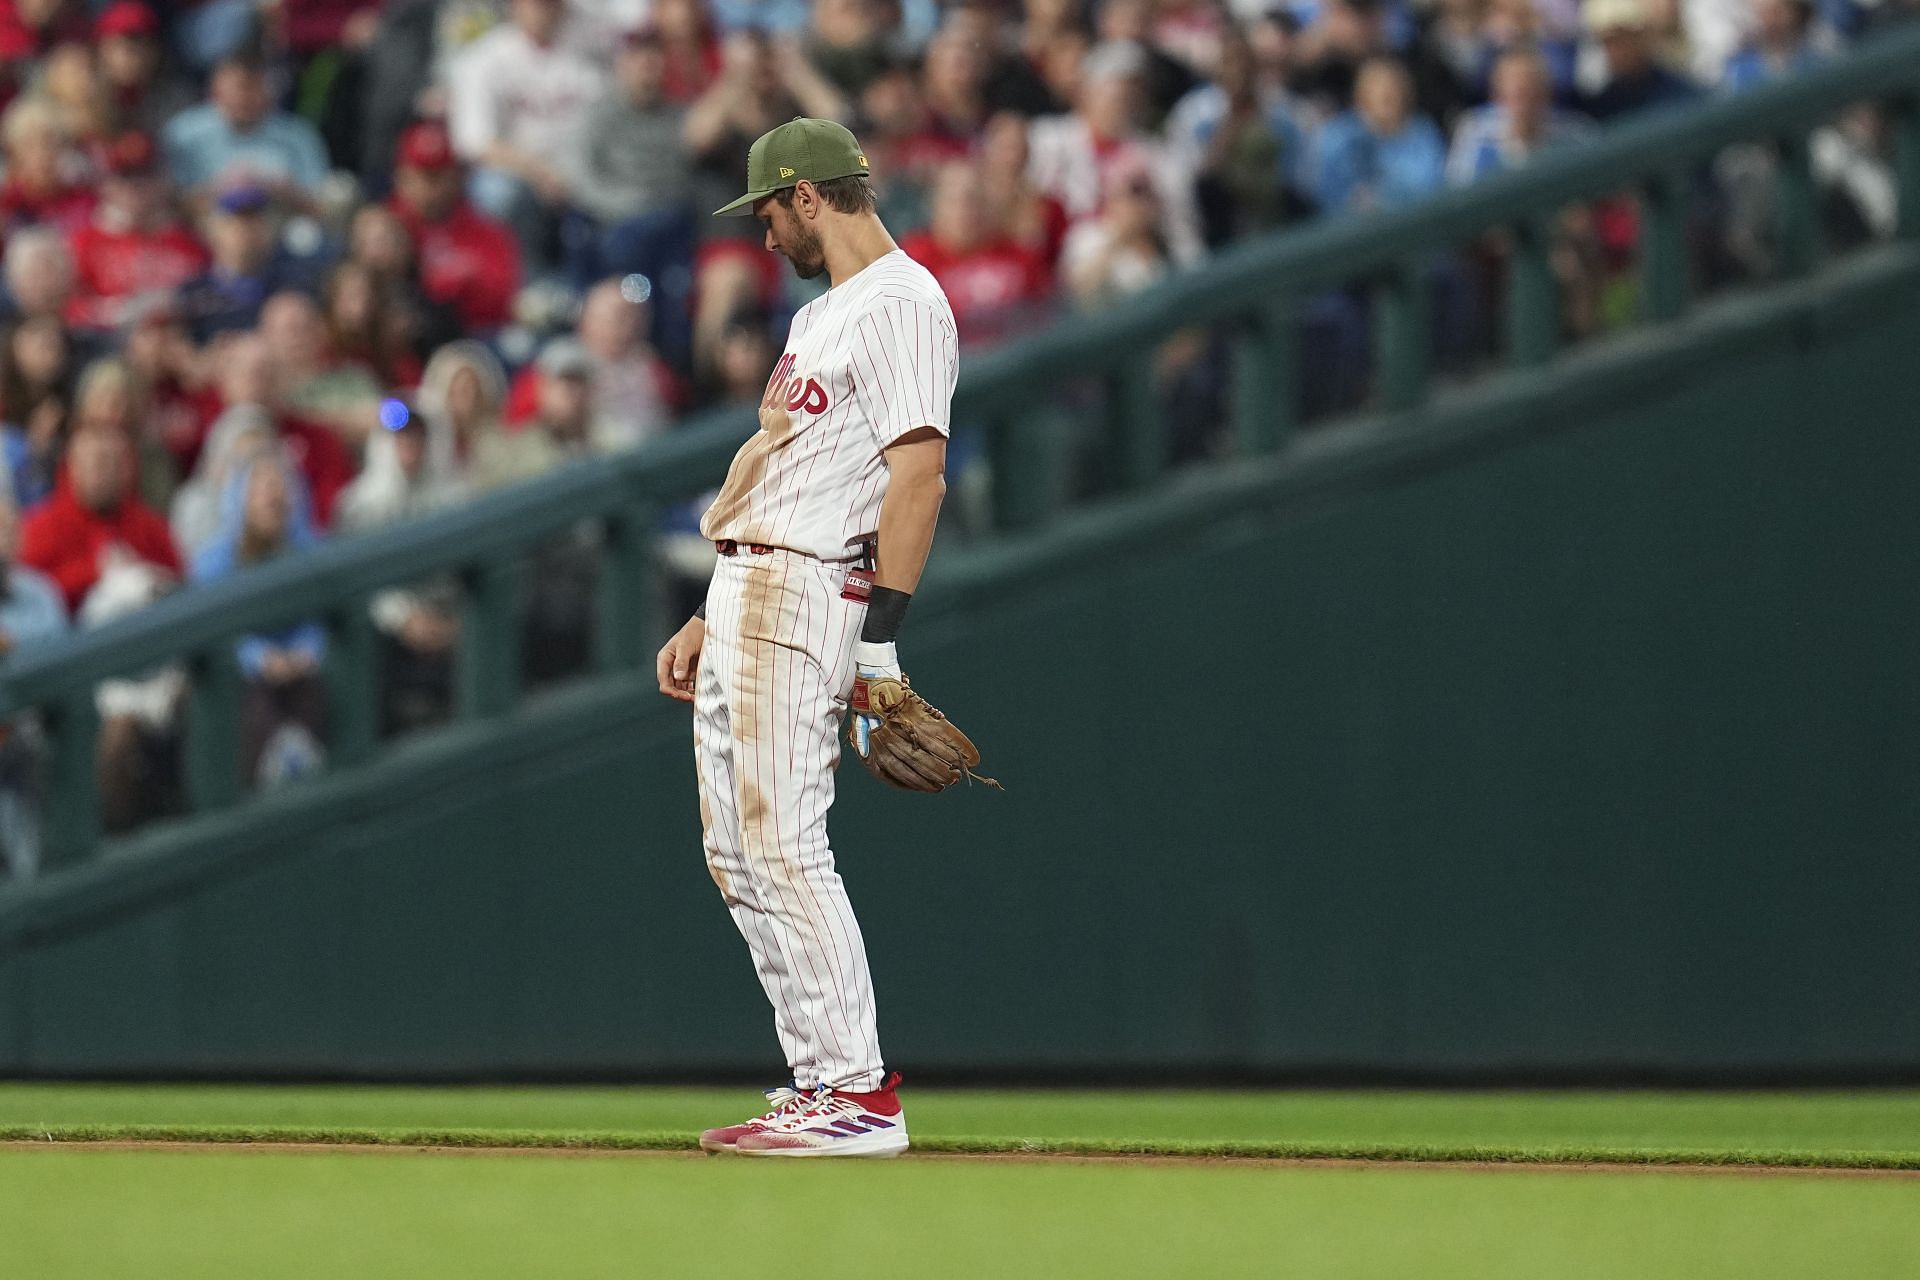 Trea Turner on joining Phillies: 'I think I'll fit in great here